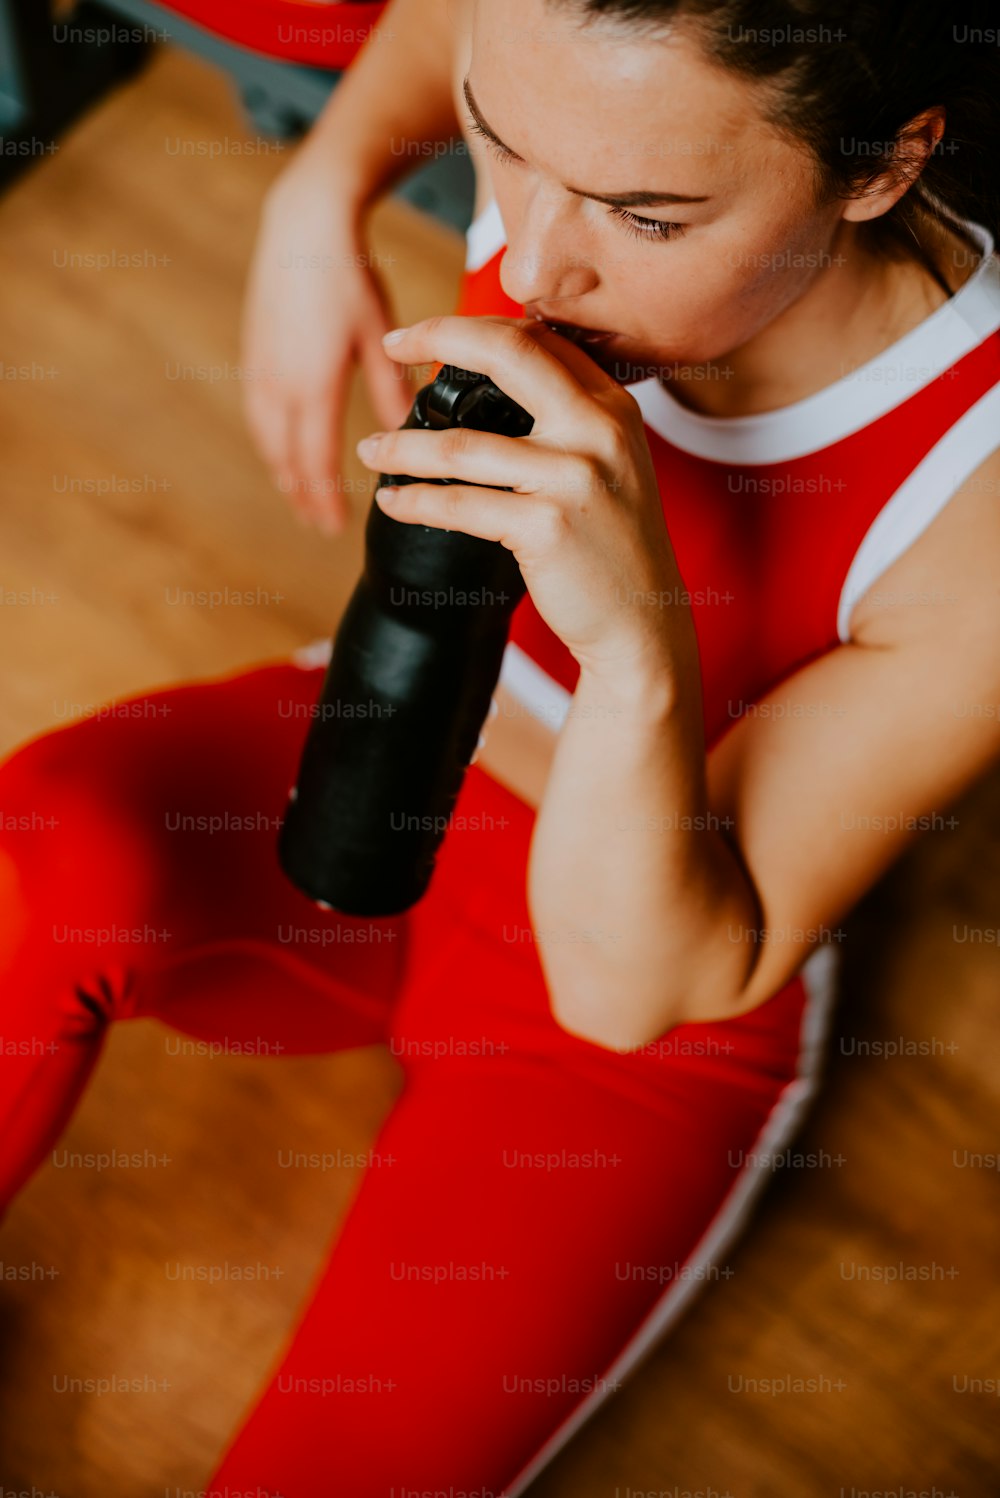 a woman sitting on the floor drinking from a bottle